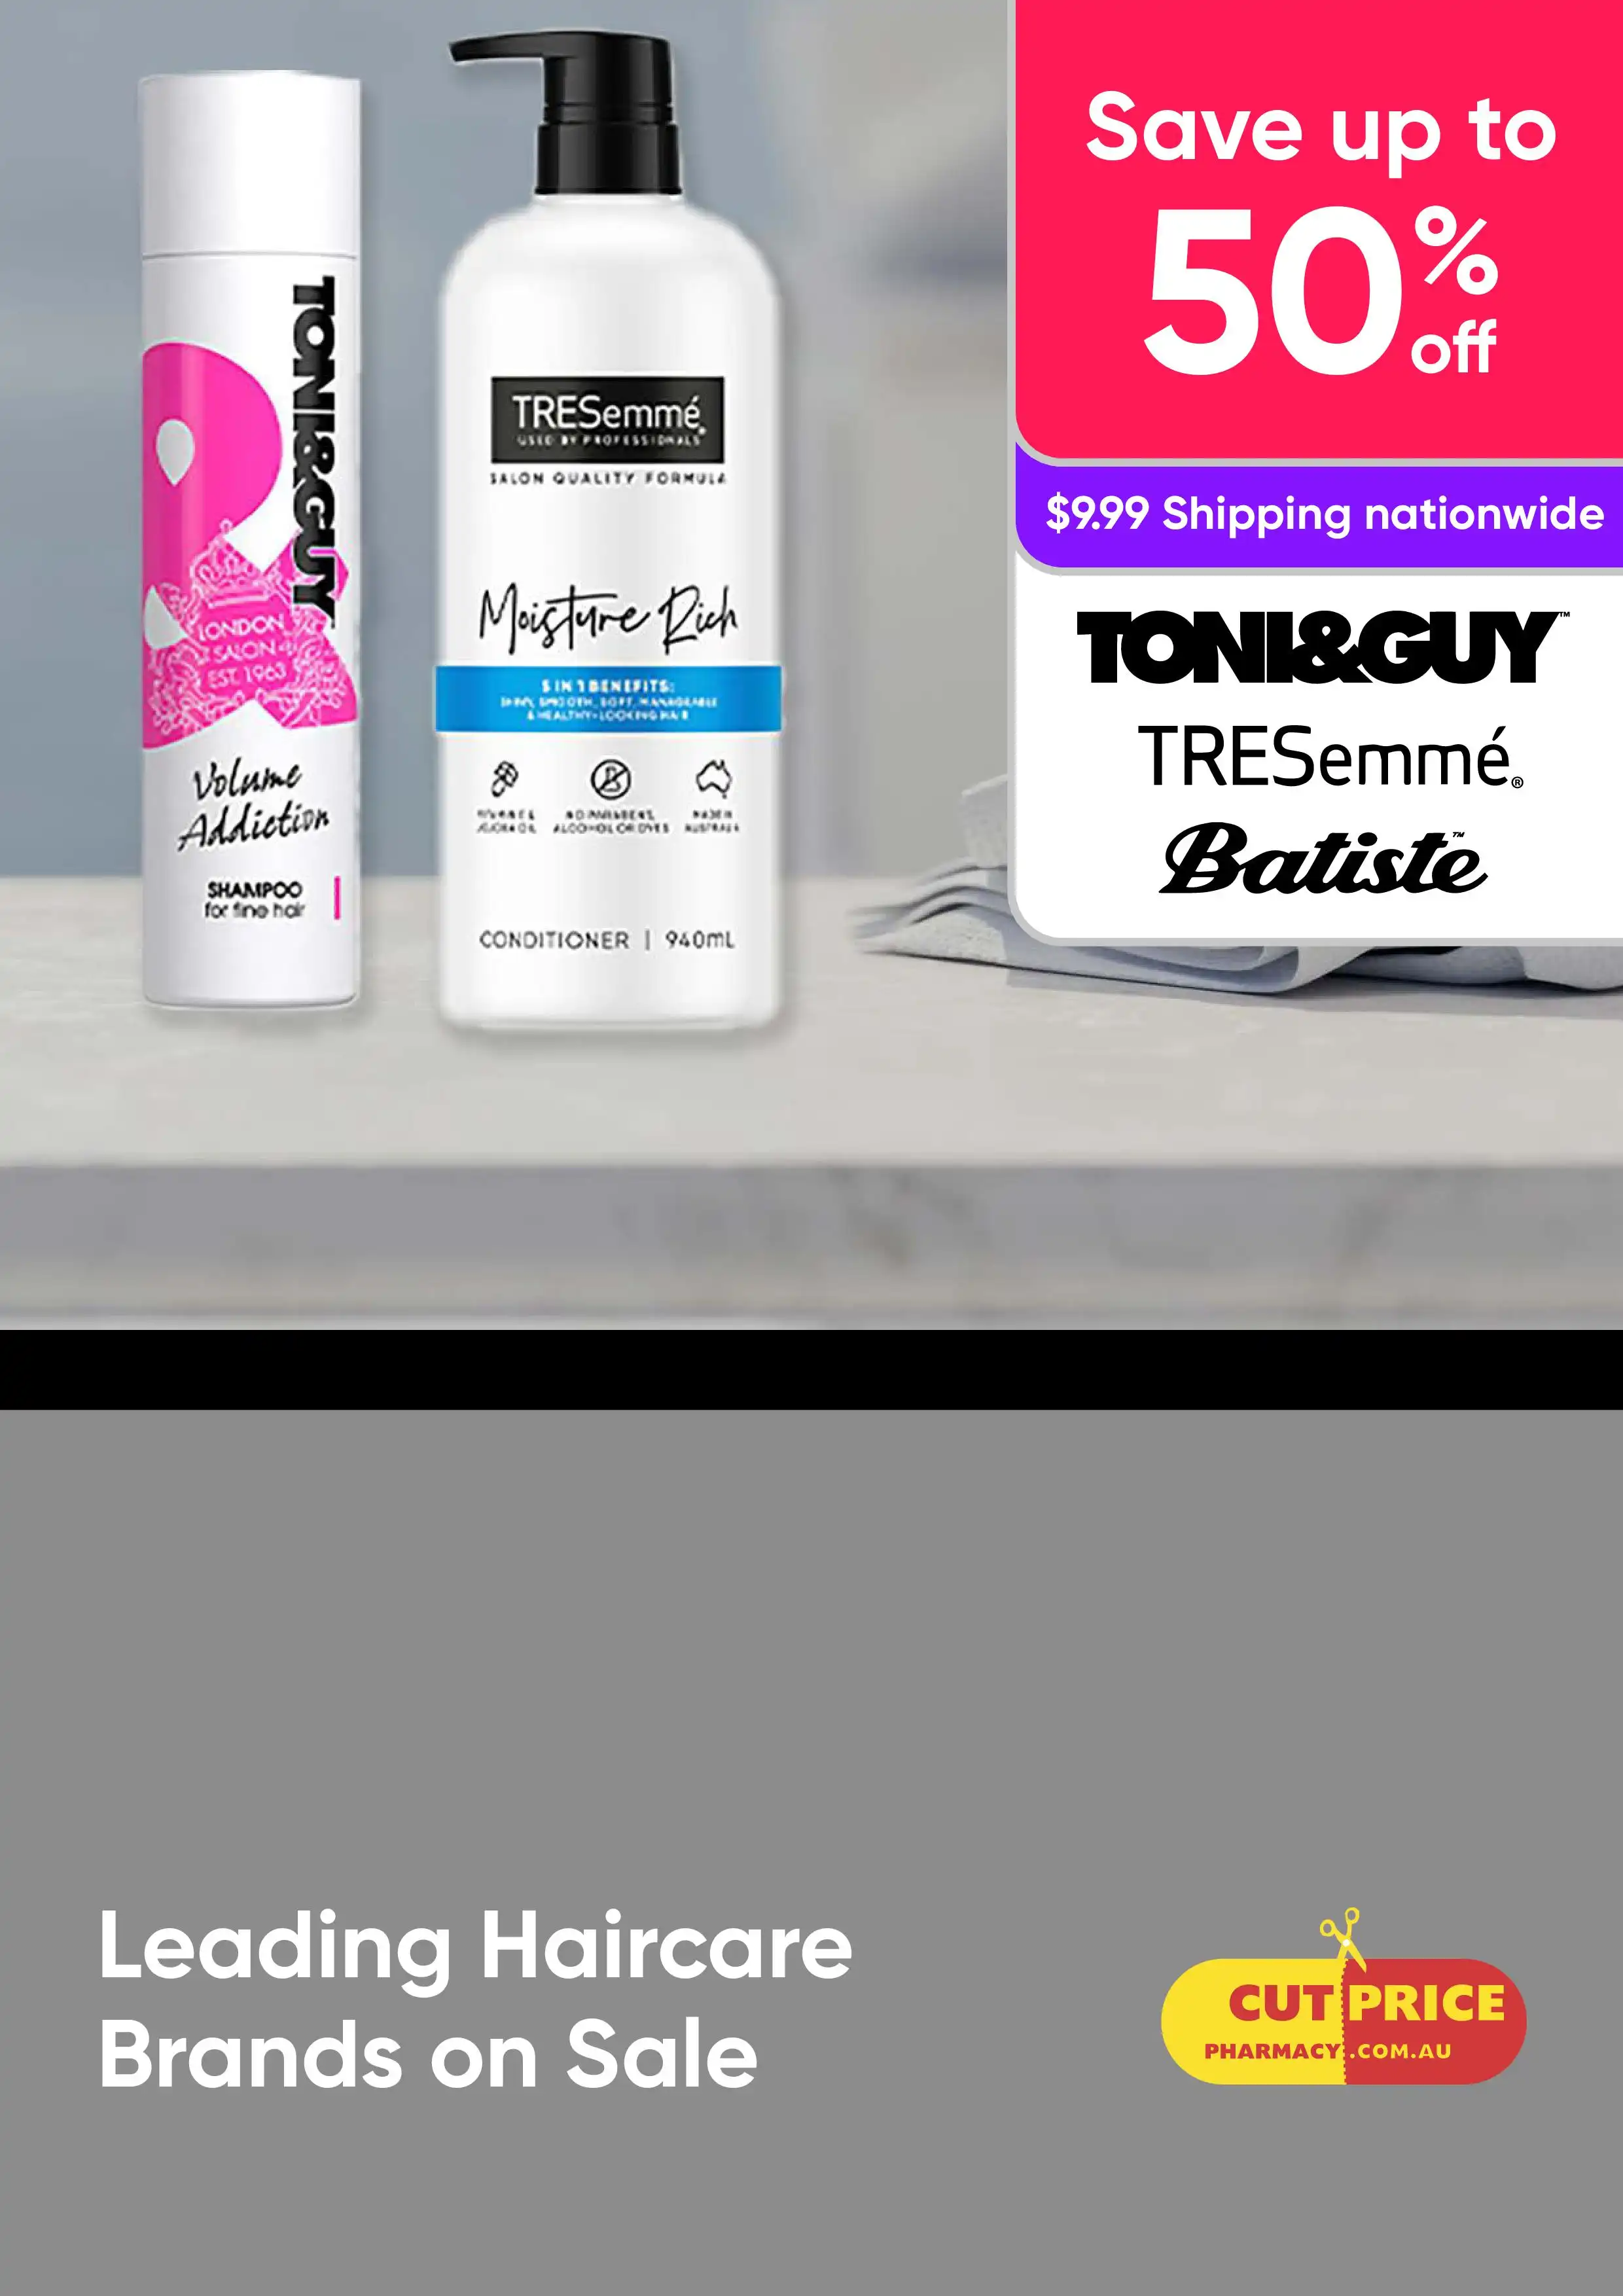 Save up to 50% on Batiste, TRESemme, Toni & Guy and other Leading Haircare Brands